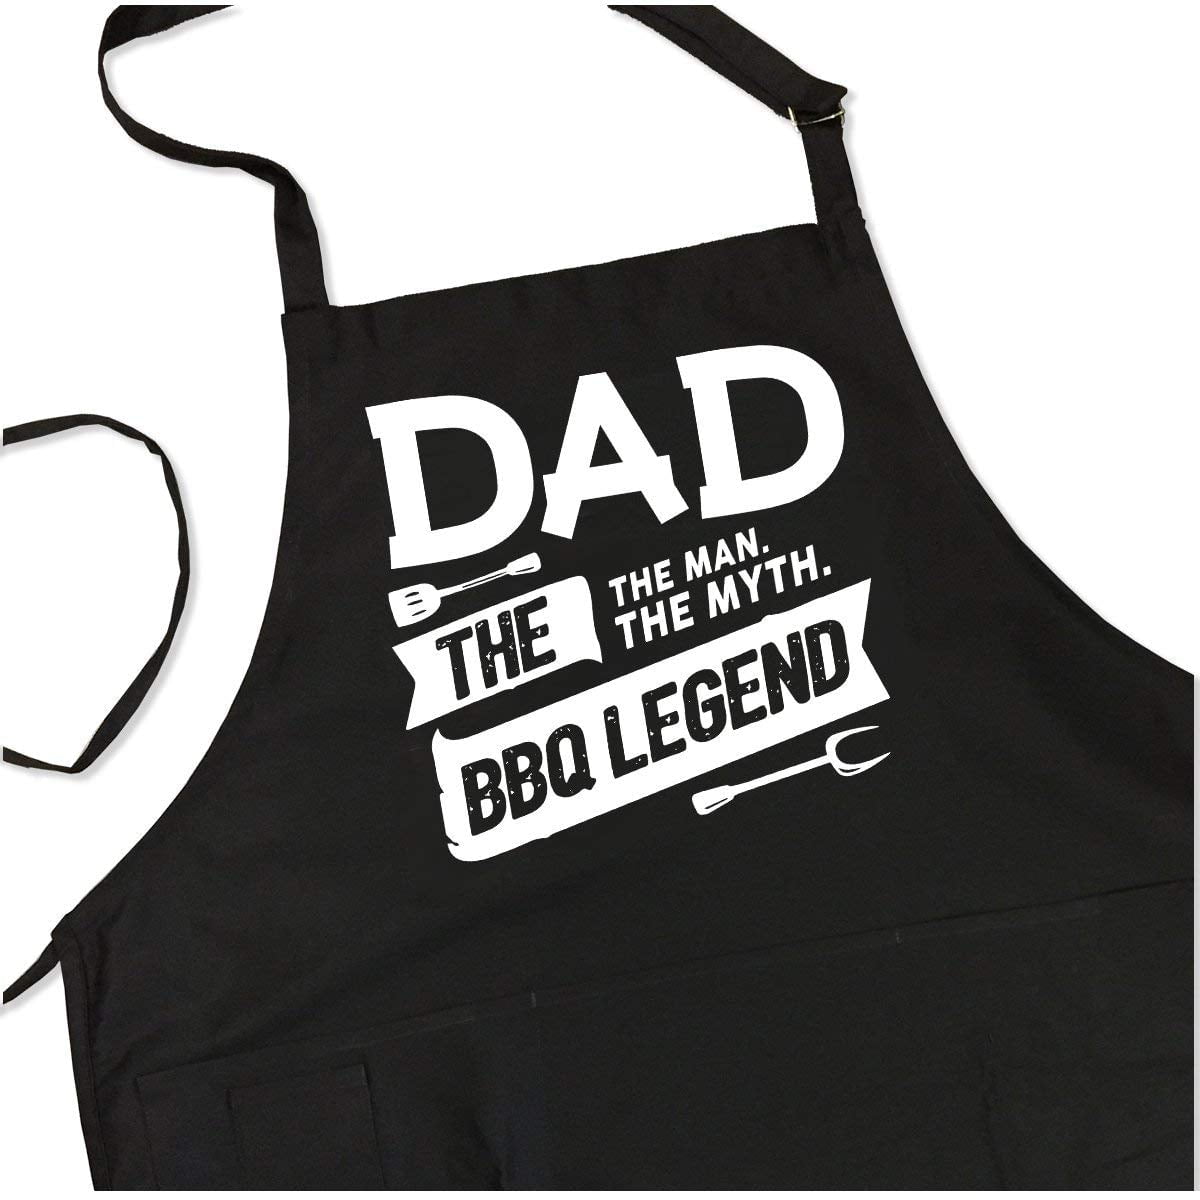 Extremely Hot Apron Grill BBQ Funny Apron Gift for Dad by ApronMen Caution